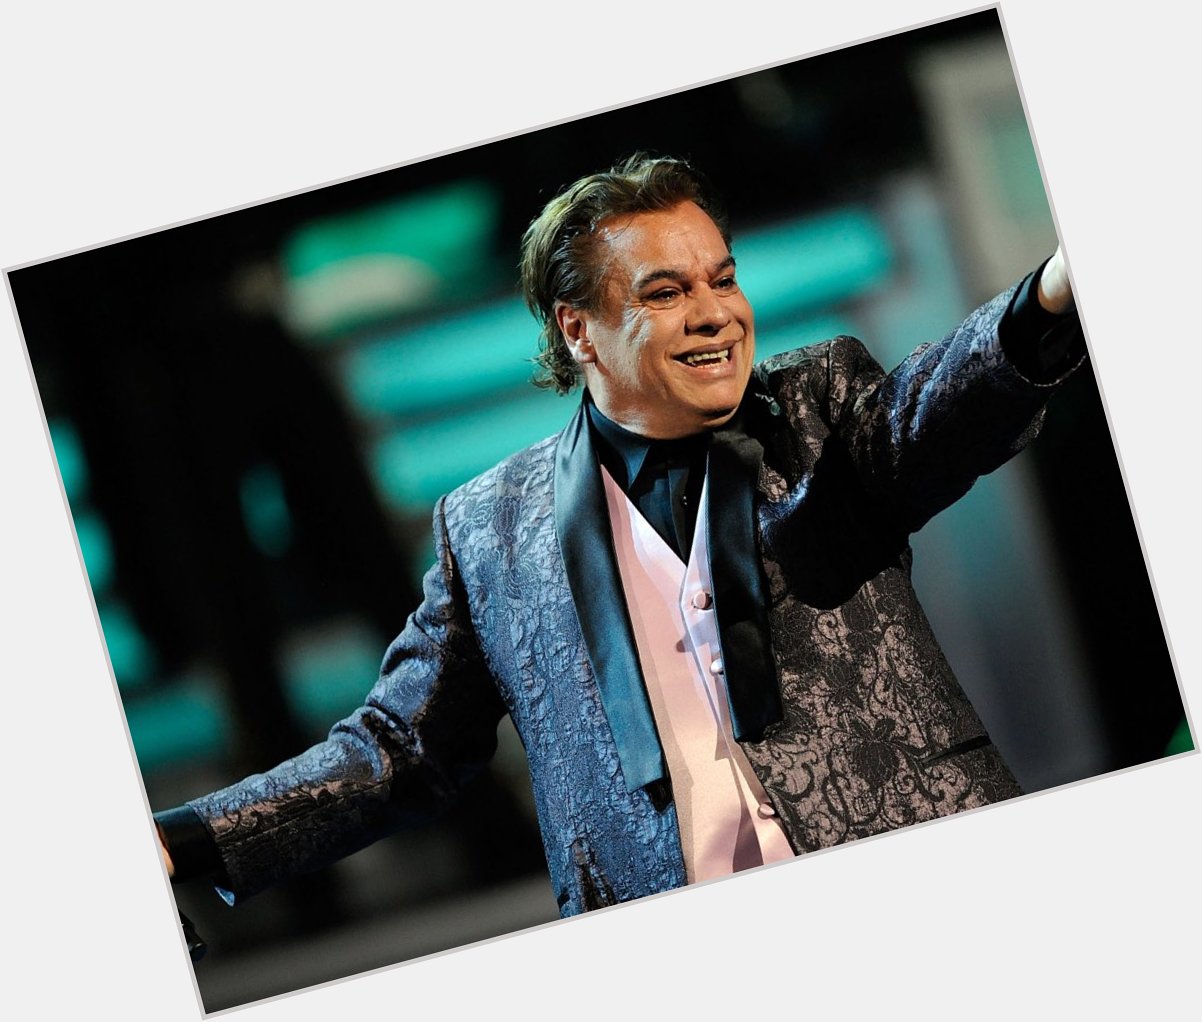 HAPPY BIRTHDAY, TODAY To a Latin Legend  January 7, 1950

Juan Gabriel, Mexican singer-songwriter. 